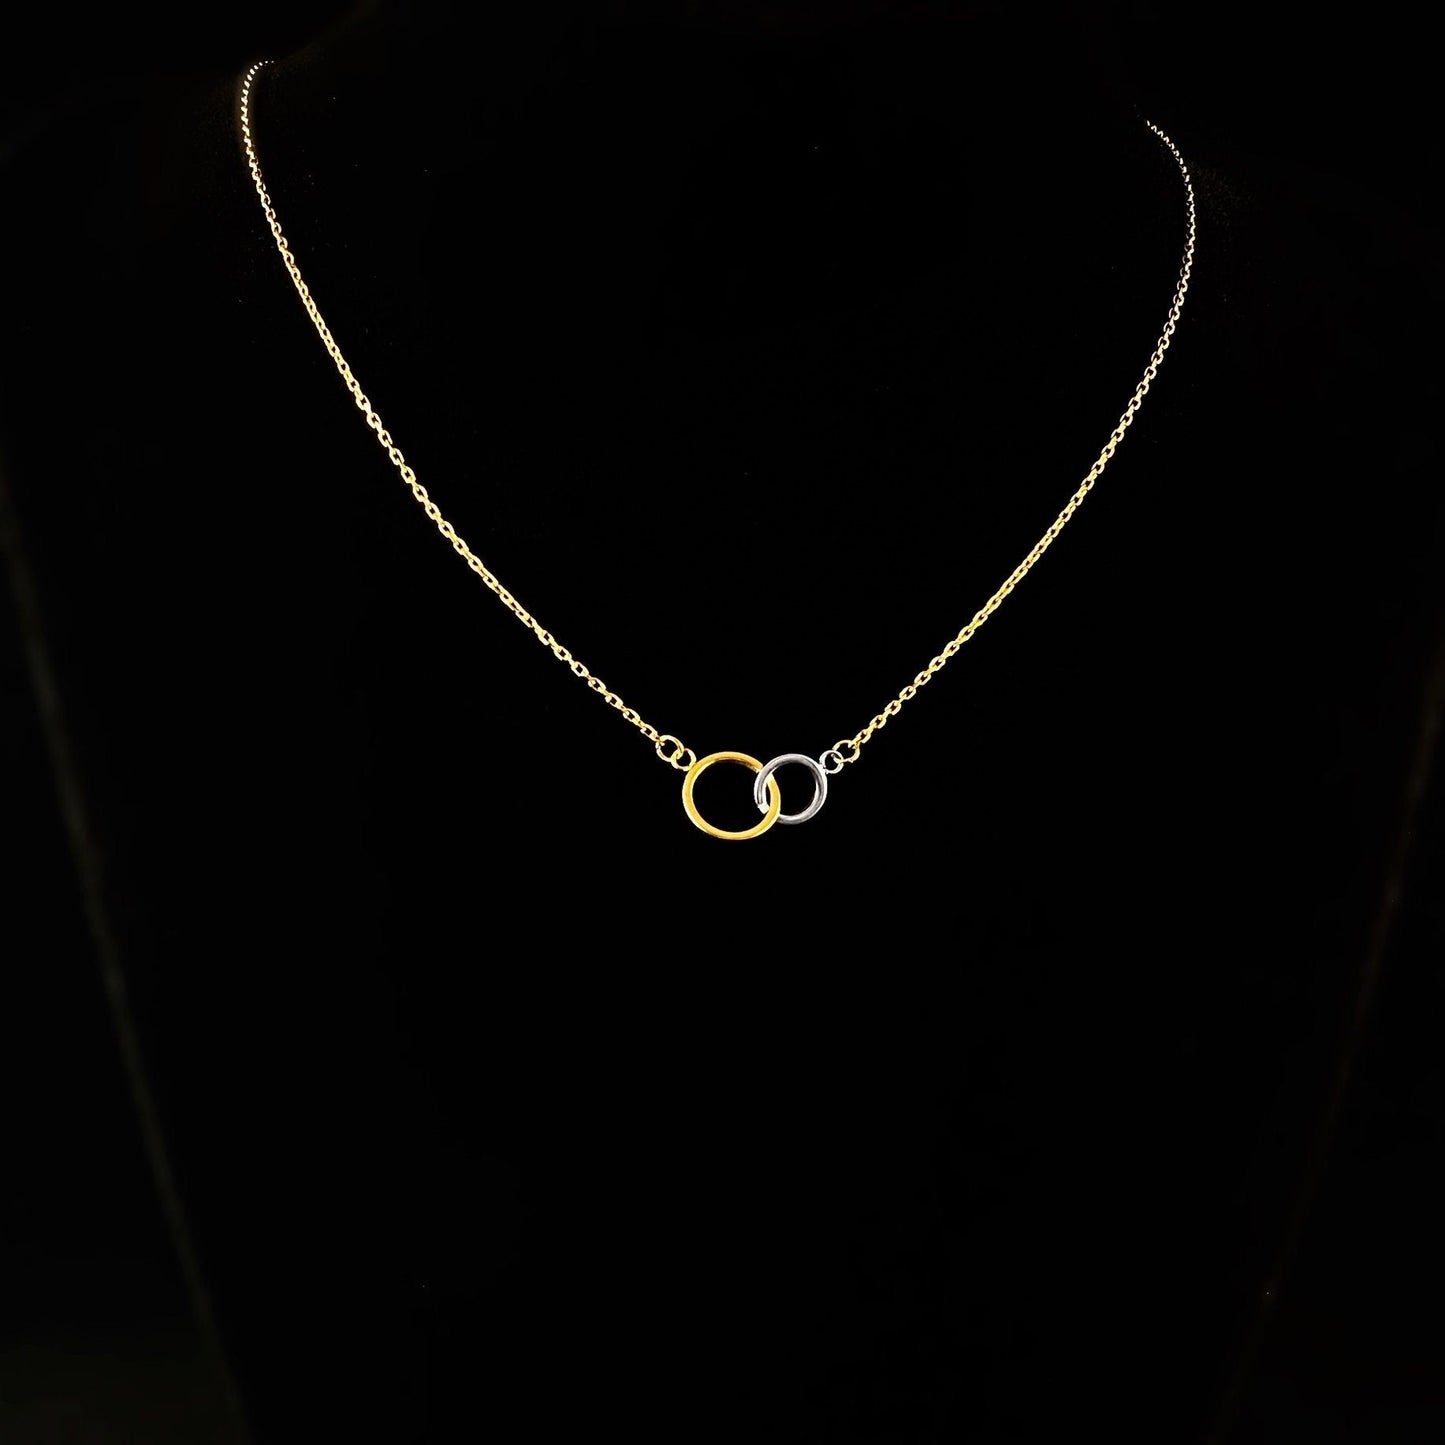 Dainty Gold and Silver Double Circle Pendant Necklace - Sabrina